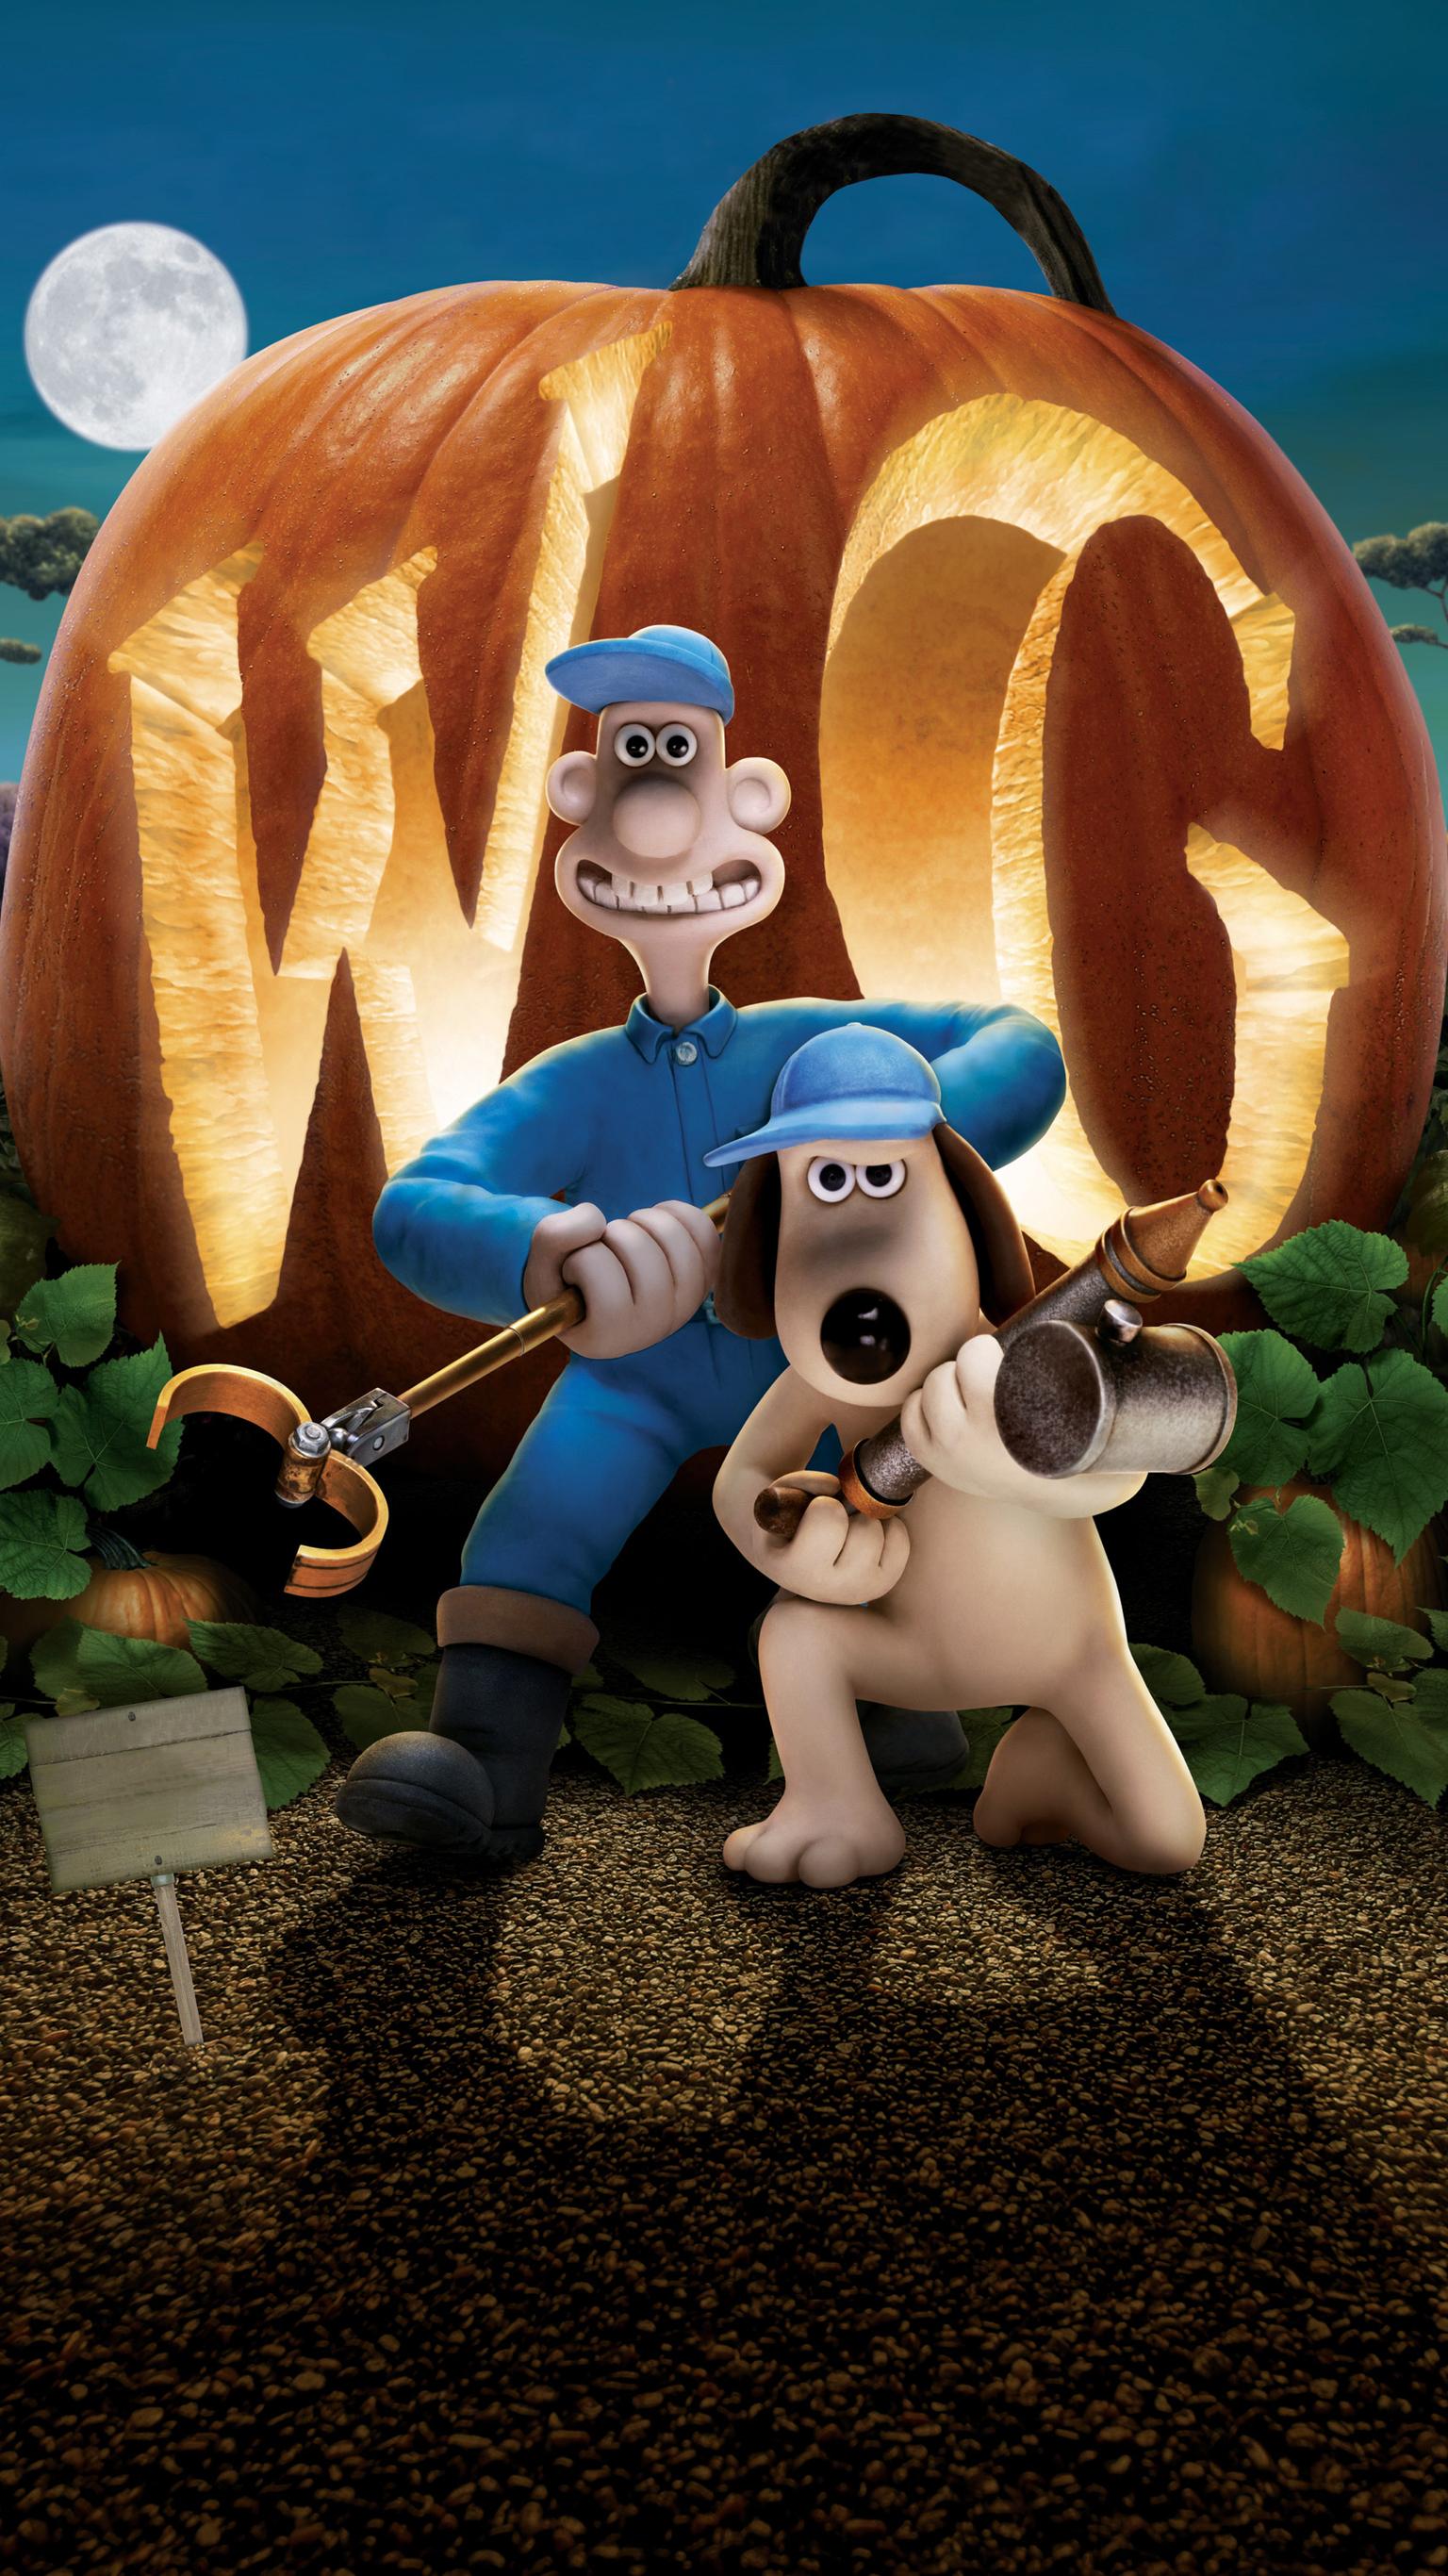 Wallace & Gromit: The Curse Of The Were Rabbit (2005) Phone Wallpaper